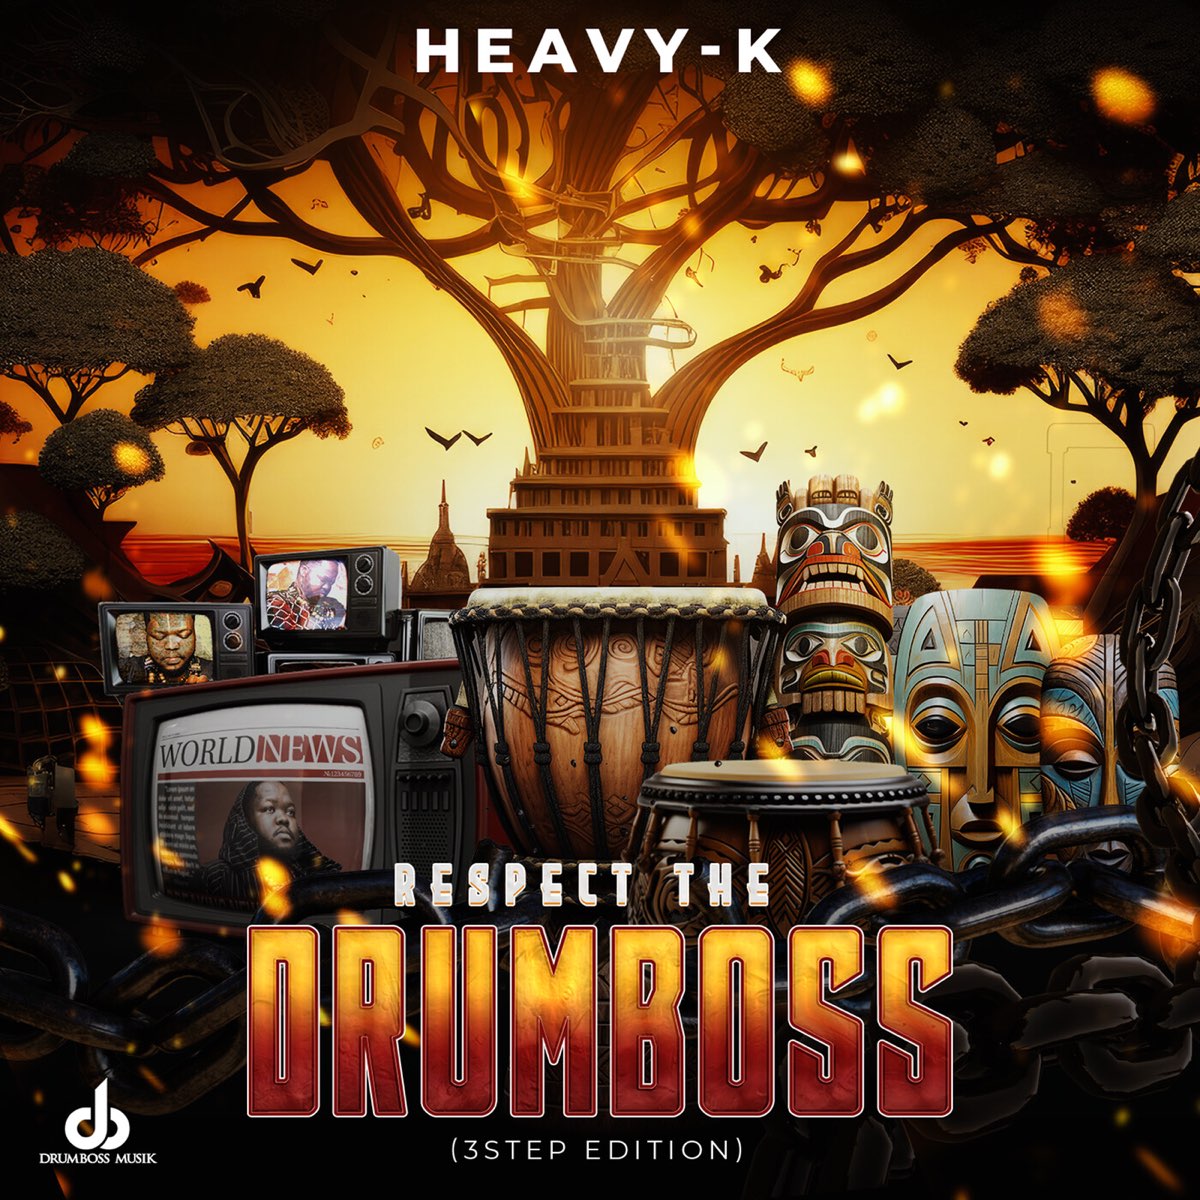 Respect The Drum Boss (3 Step Edition) by Heavy K | Album